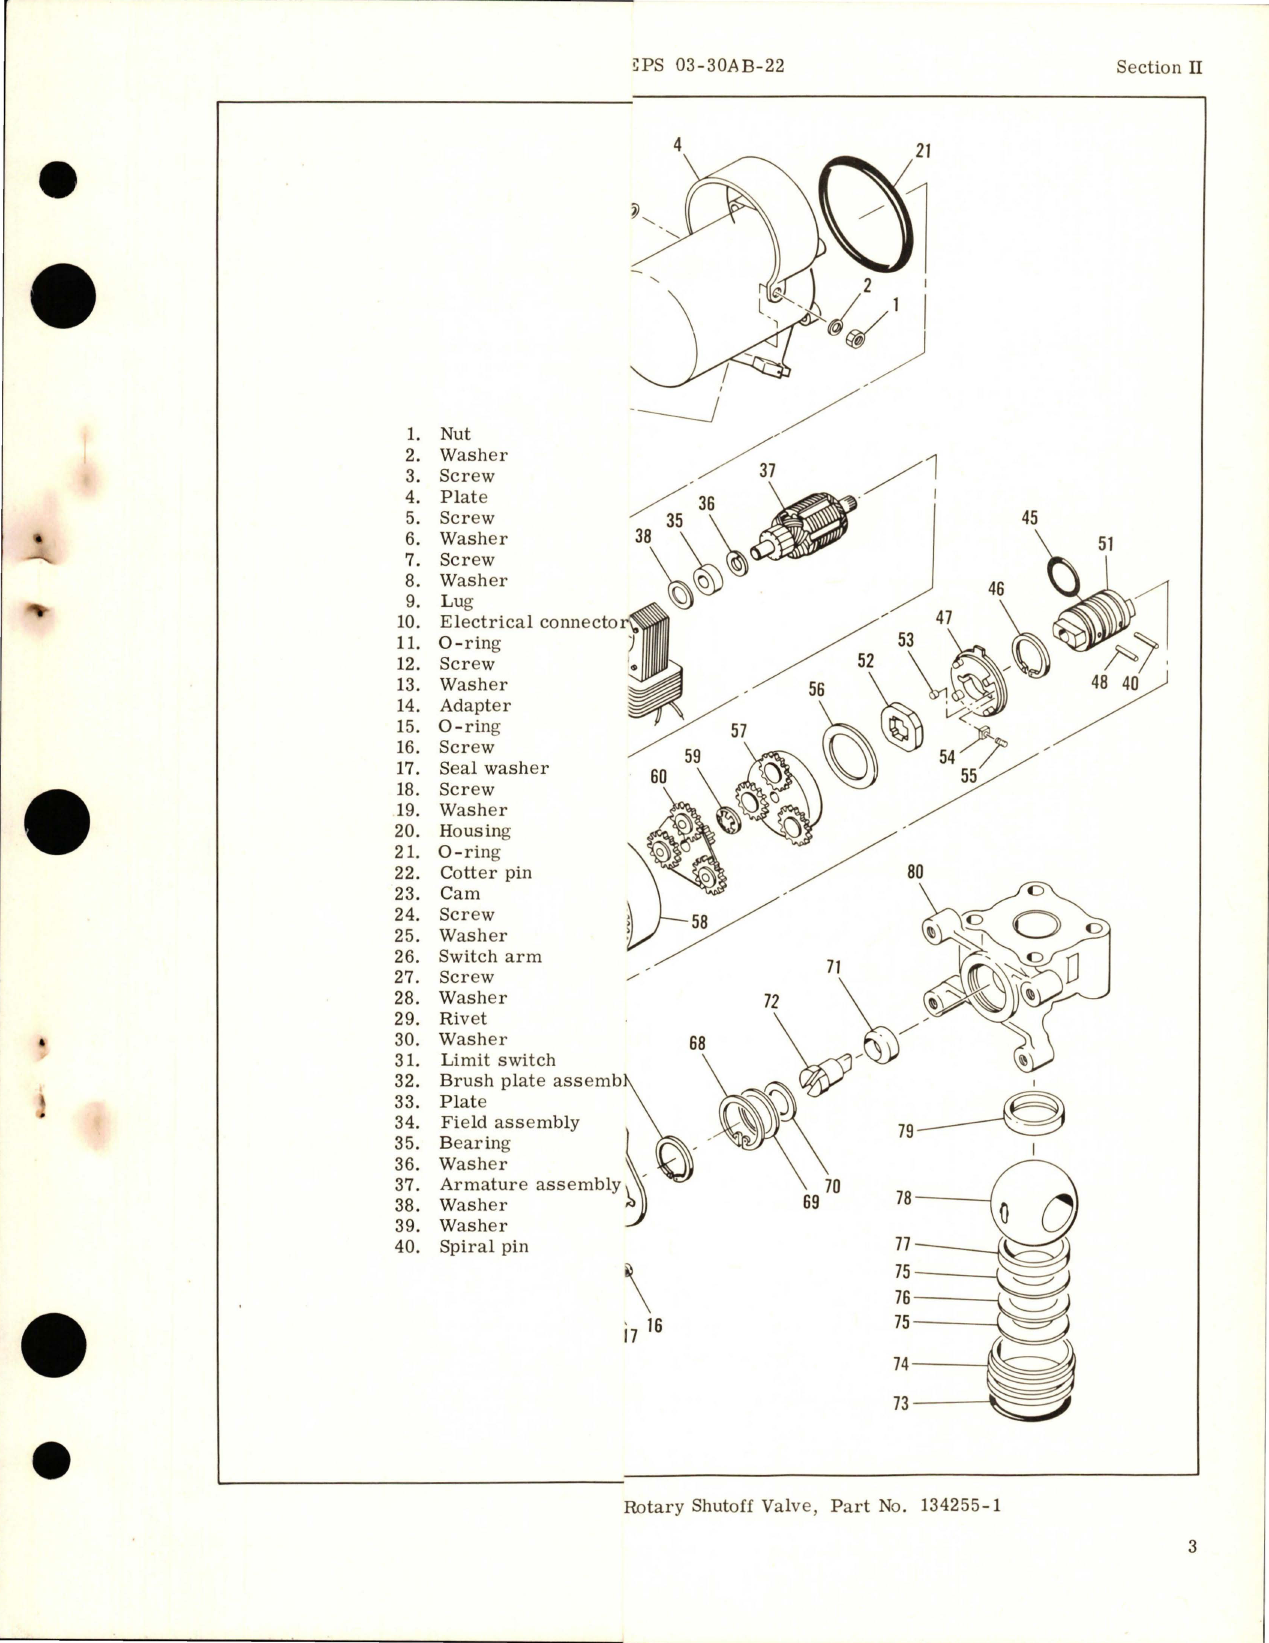 Sample page 5 from AirCorps Library document: Overhaul Instructions for Motor Actuated Rotary Shutoff Valve - Part 134255-1 